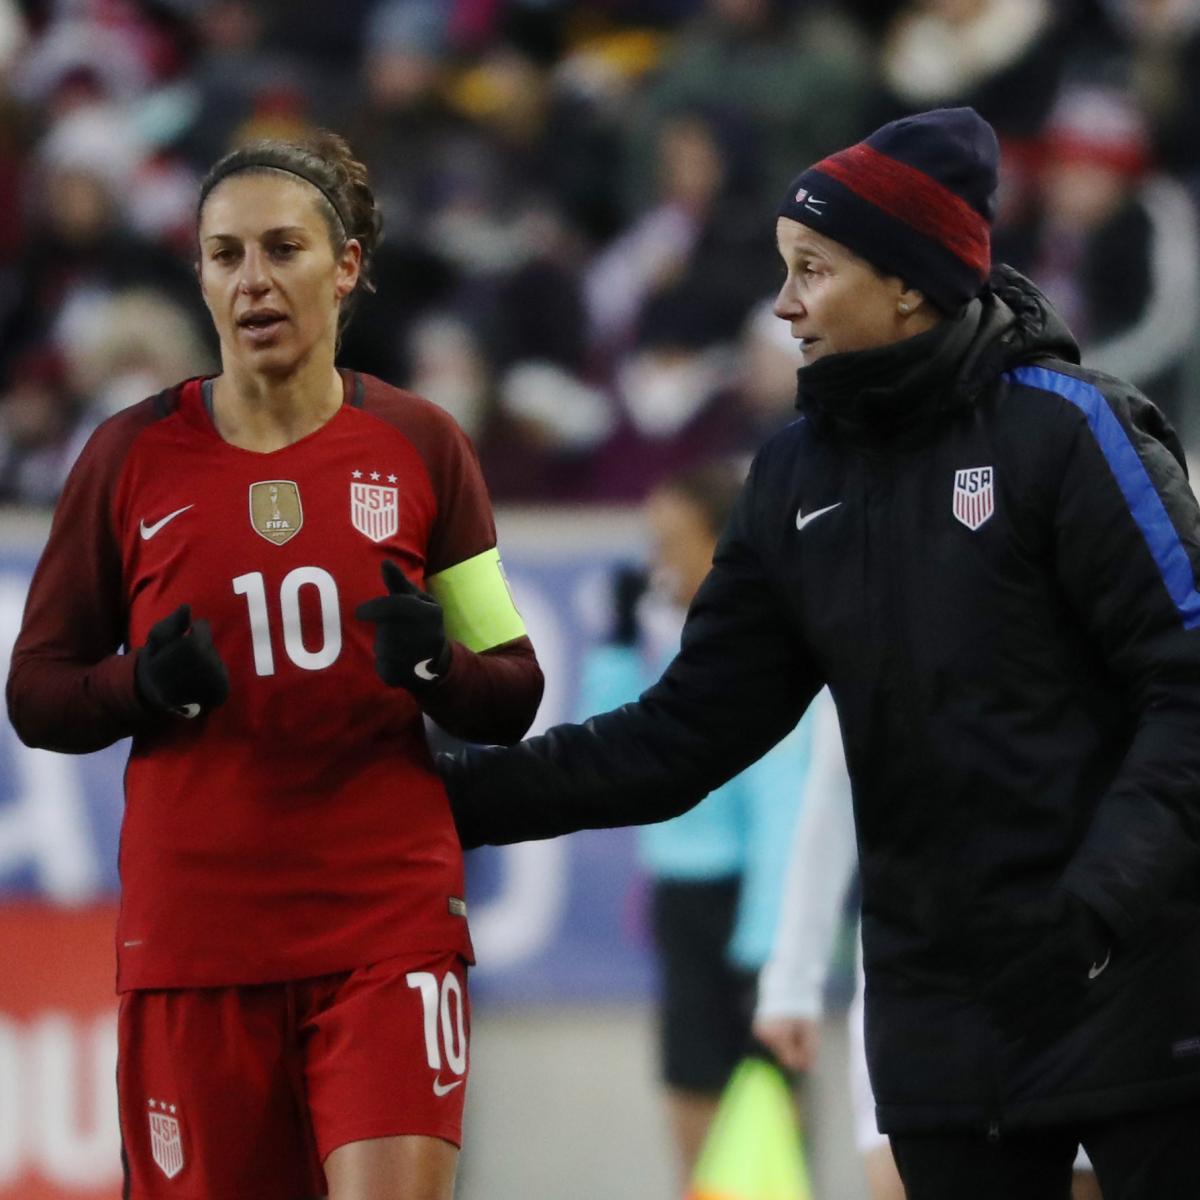 USA vs. Russia Women's Soccer: Date, Time, Live Stream for Sunday